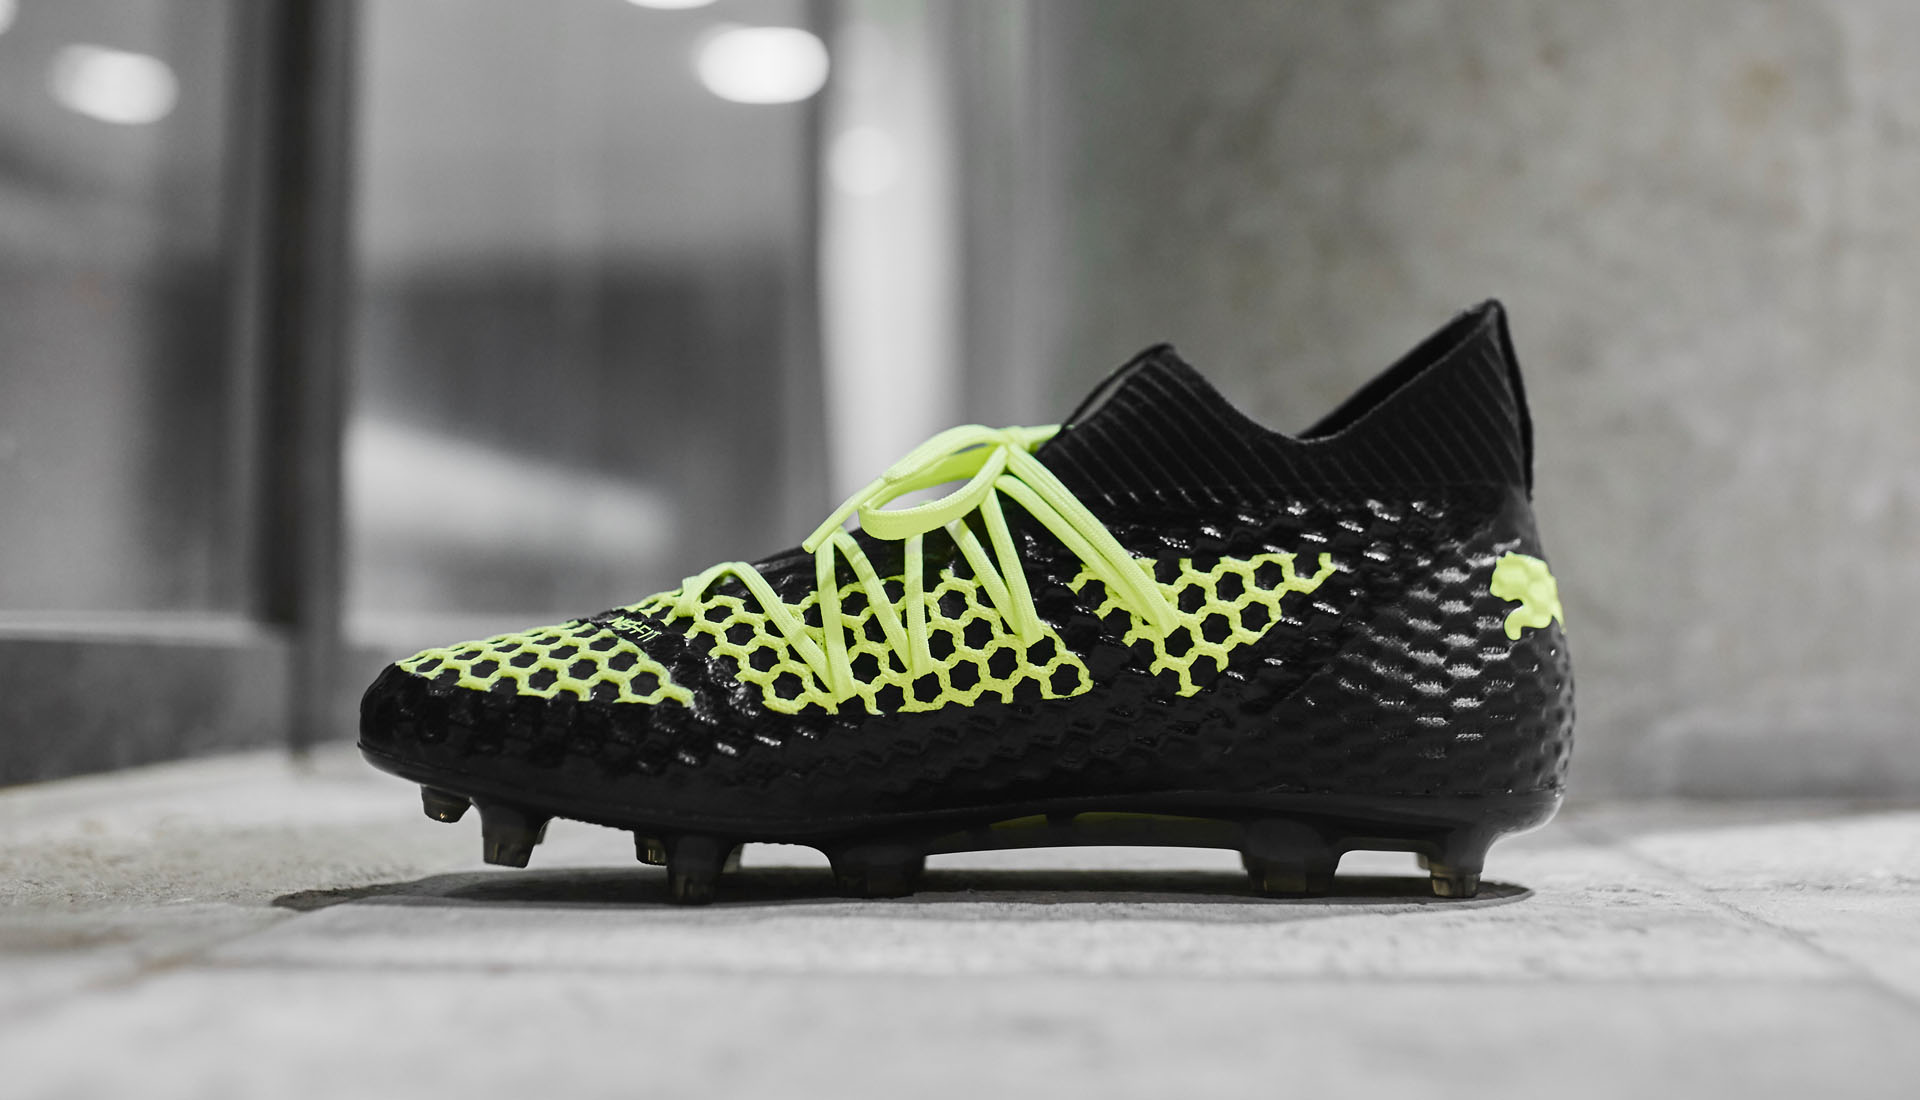 PUMA Launch the FUTURE 18.1 NETFIT Football Boots - SoccerBible